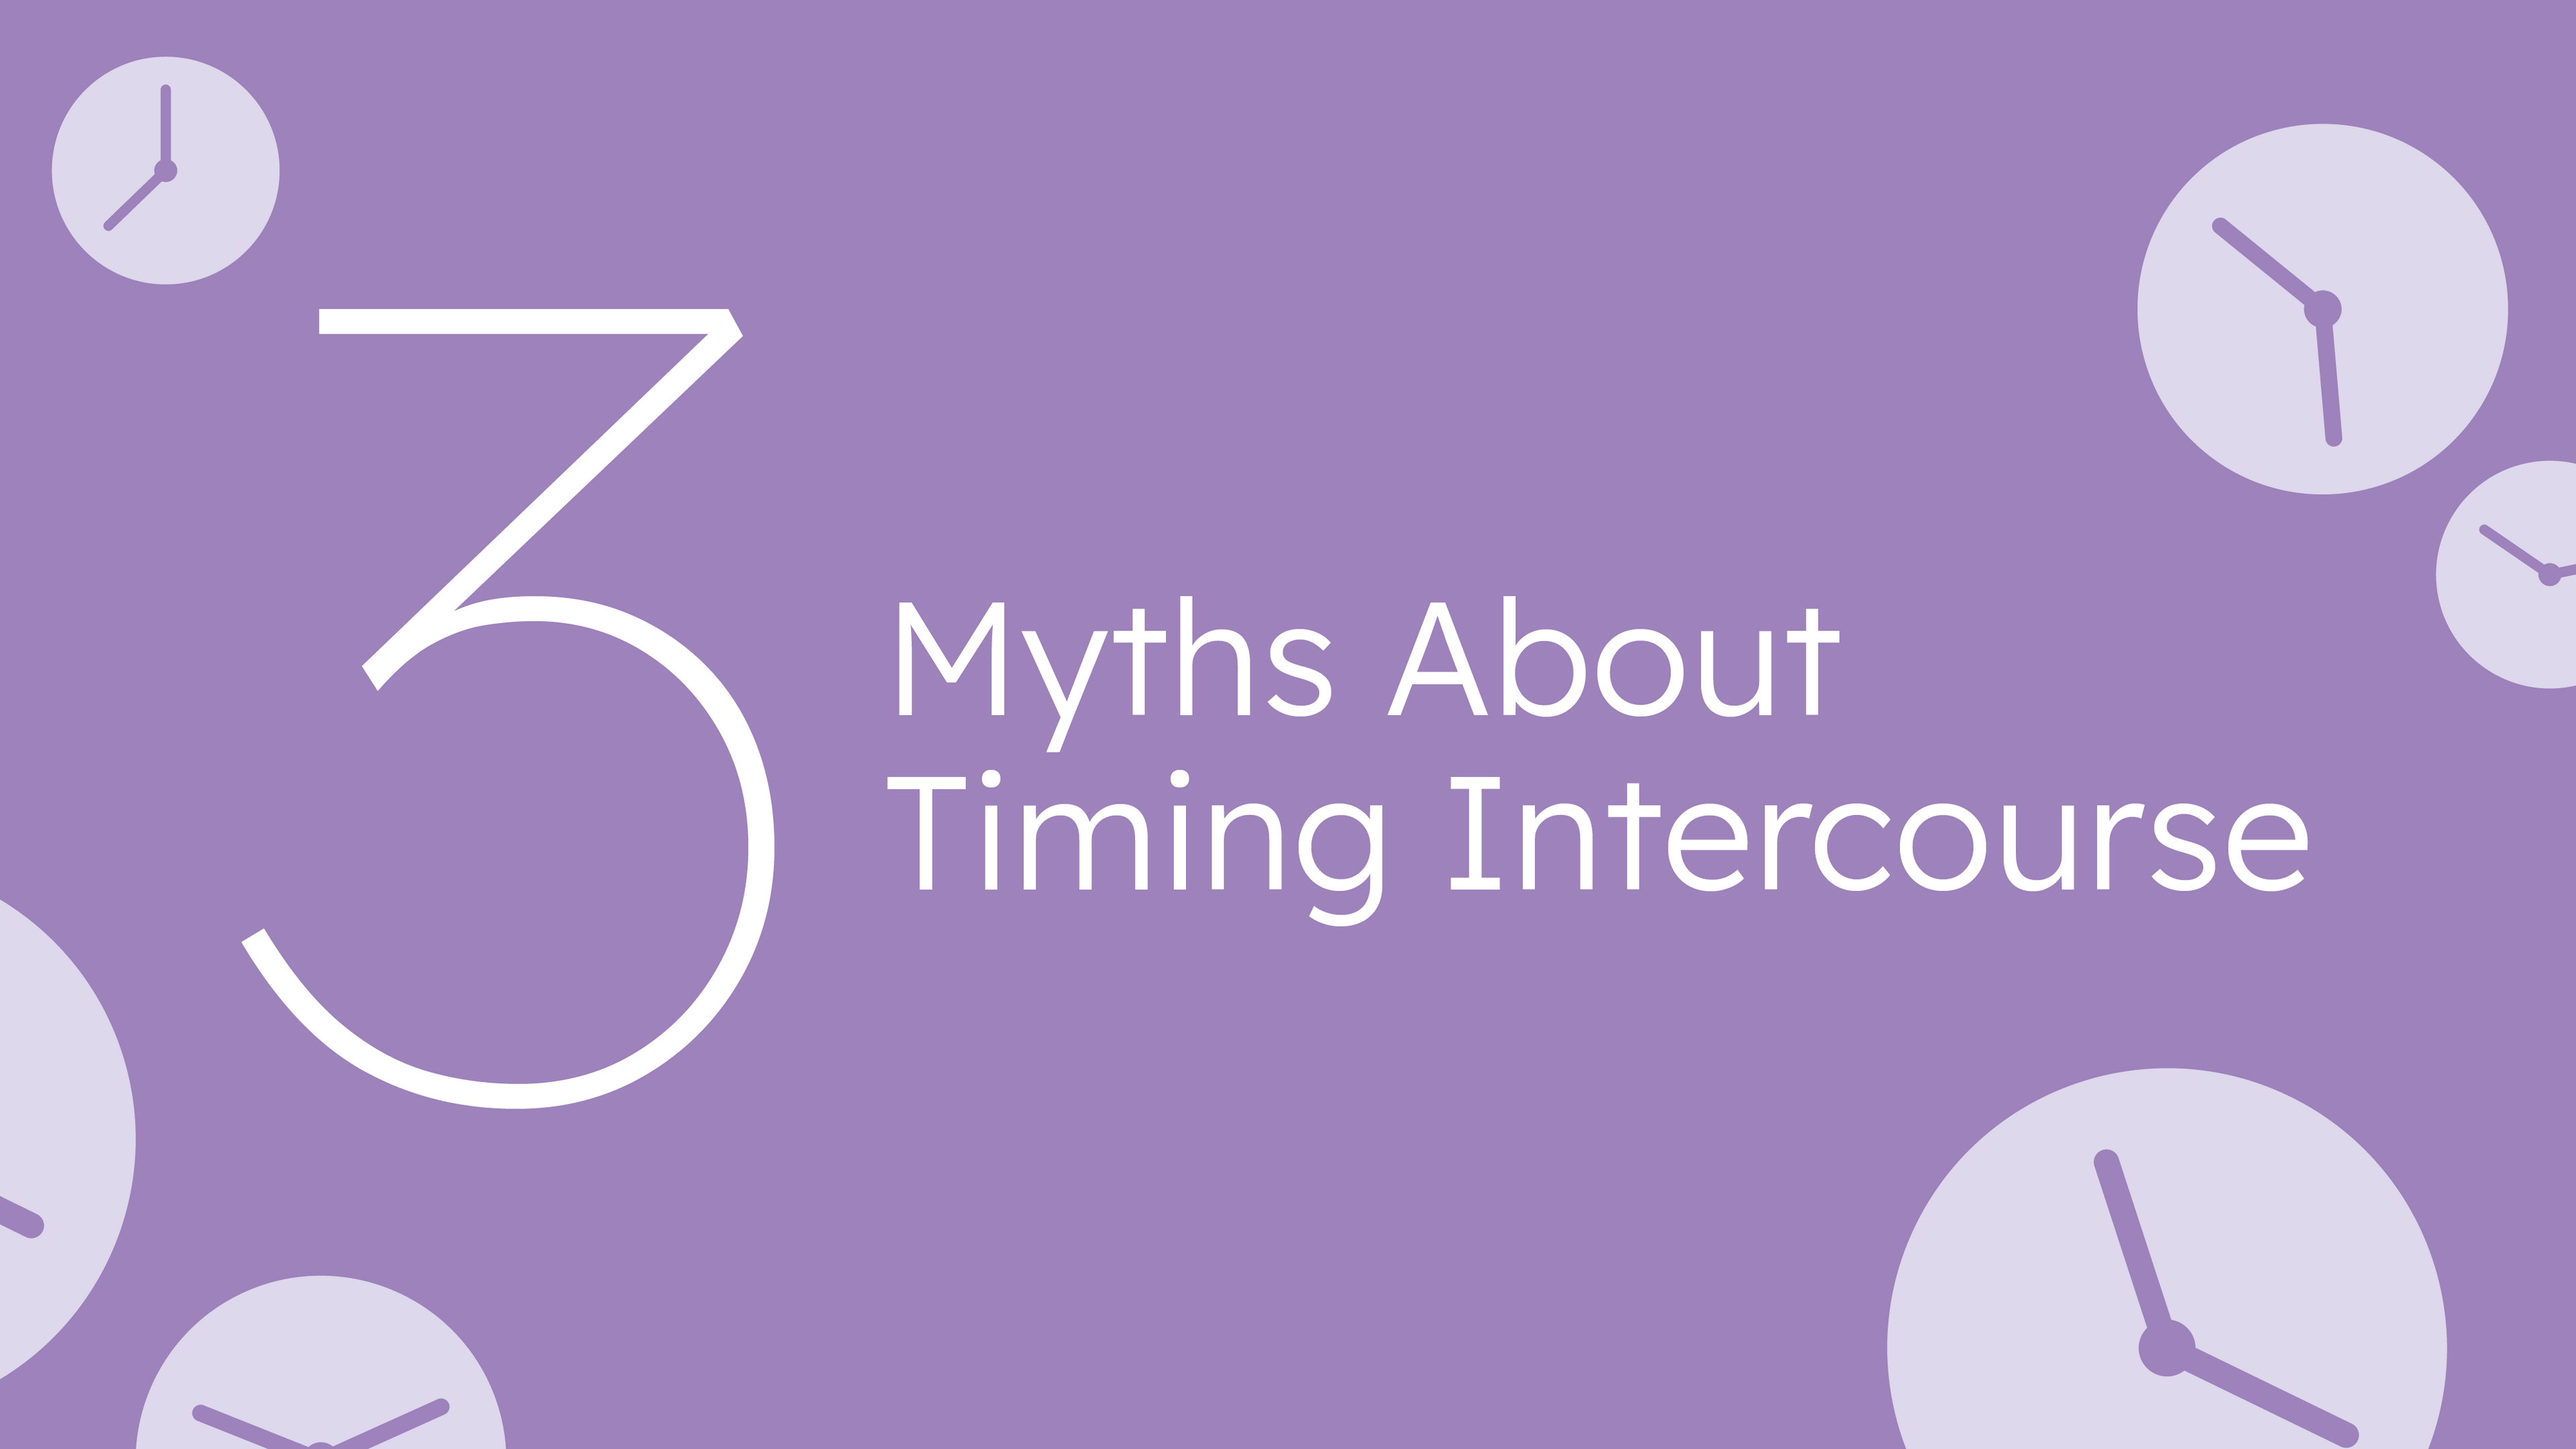 3 myths about timing intercourse